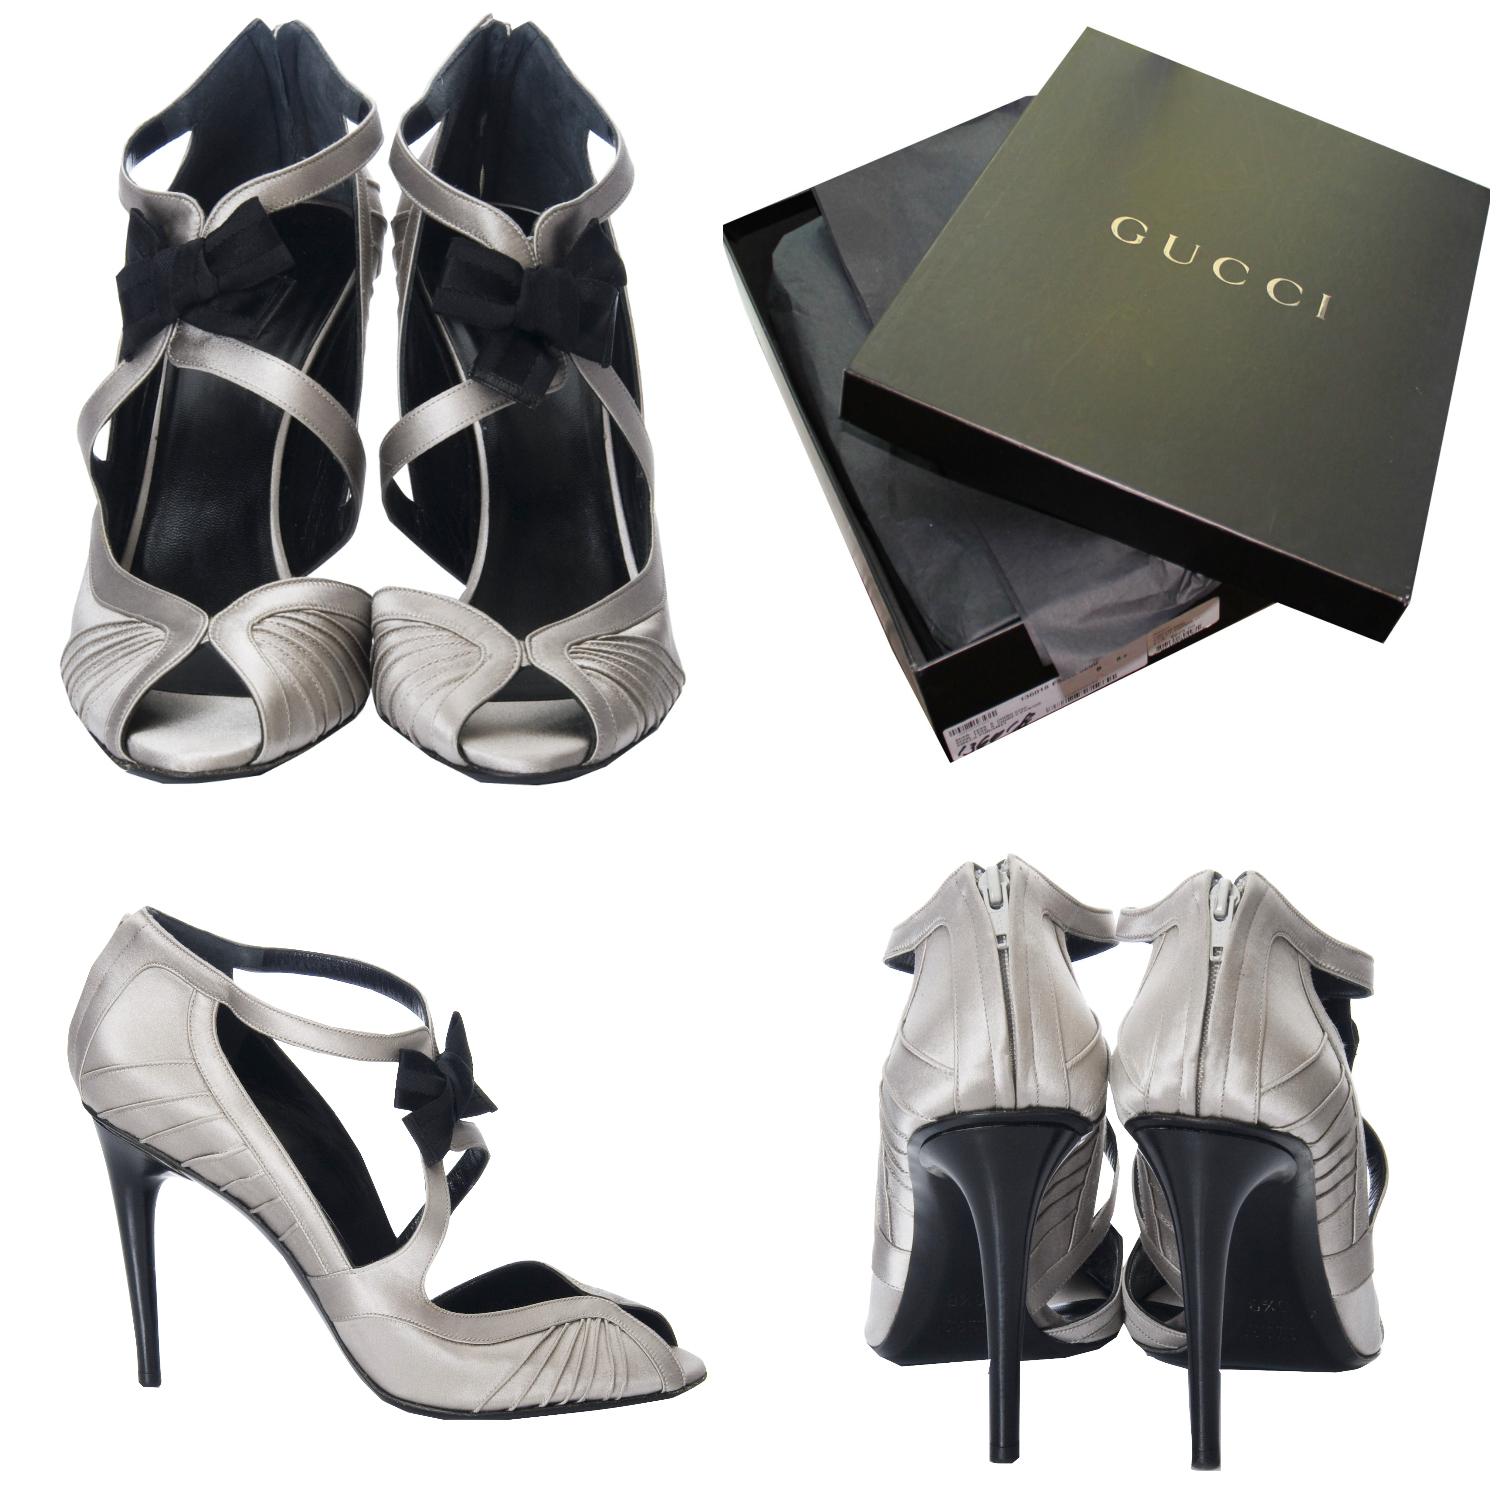 Tom Ford For Gucci Heels
Brand New
As Seen on Sarah Jessica Parker
* Stunning in Silver Satin
* Tom Ford for Gucci
* Size: 8.5
* Black Satin Bow at Front
* Leather Insole 
* Zips up the Back 
* 4